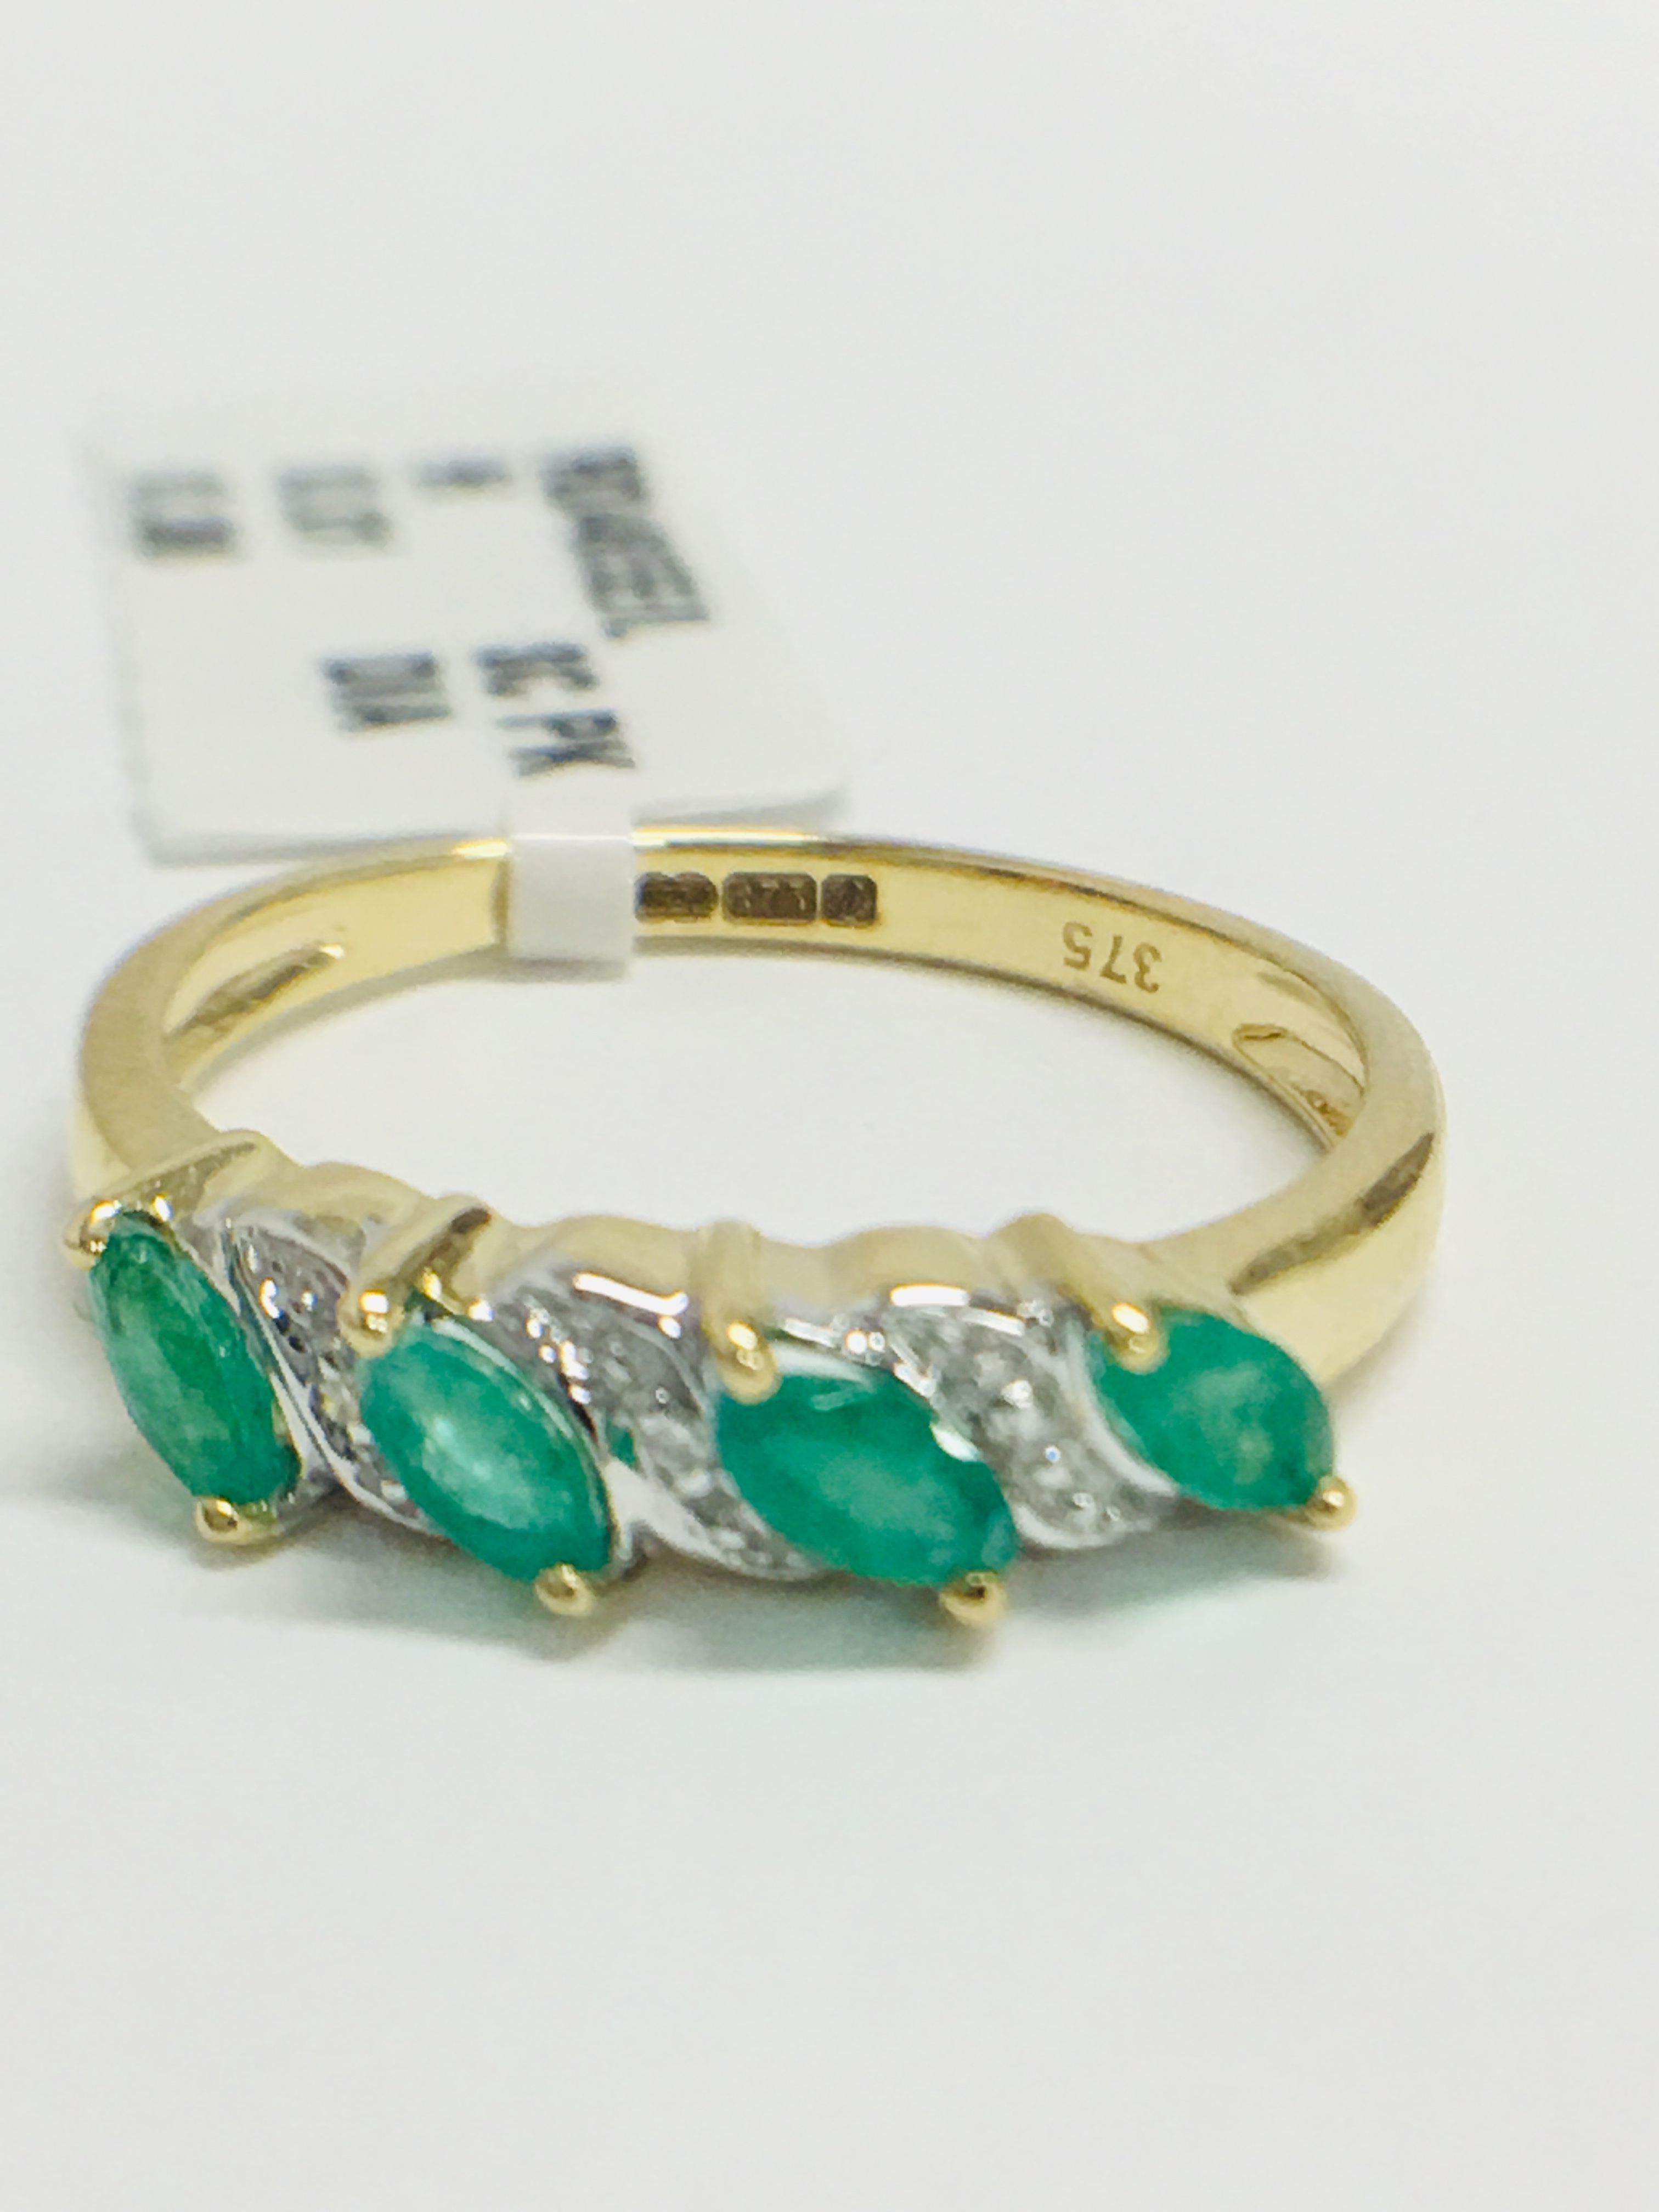 9ct yellow gold emerald and diamond ring - Image 2 of 11